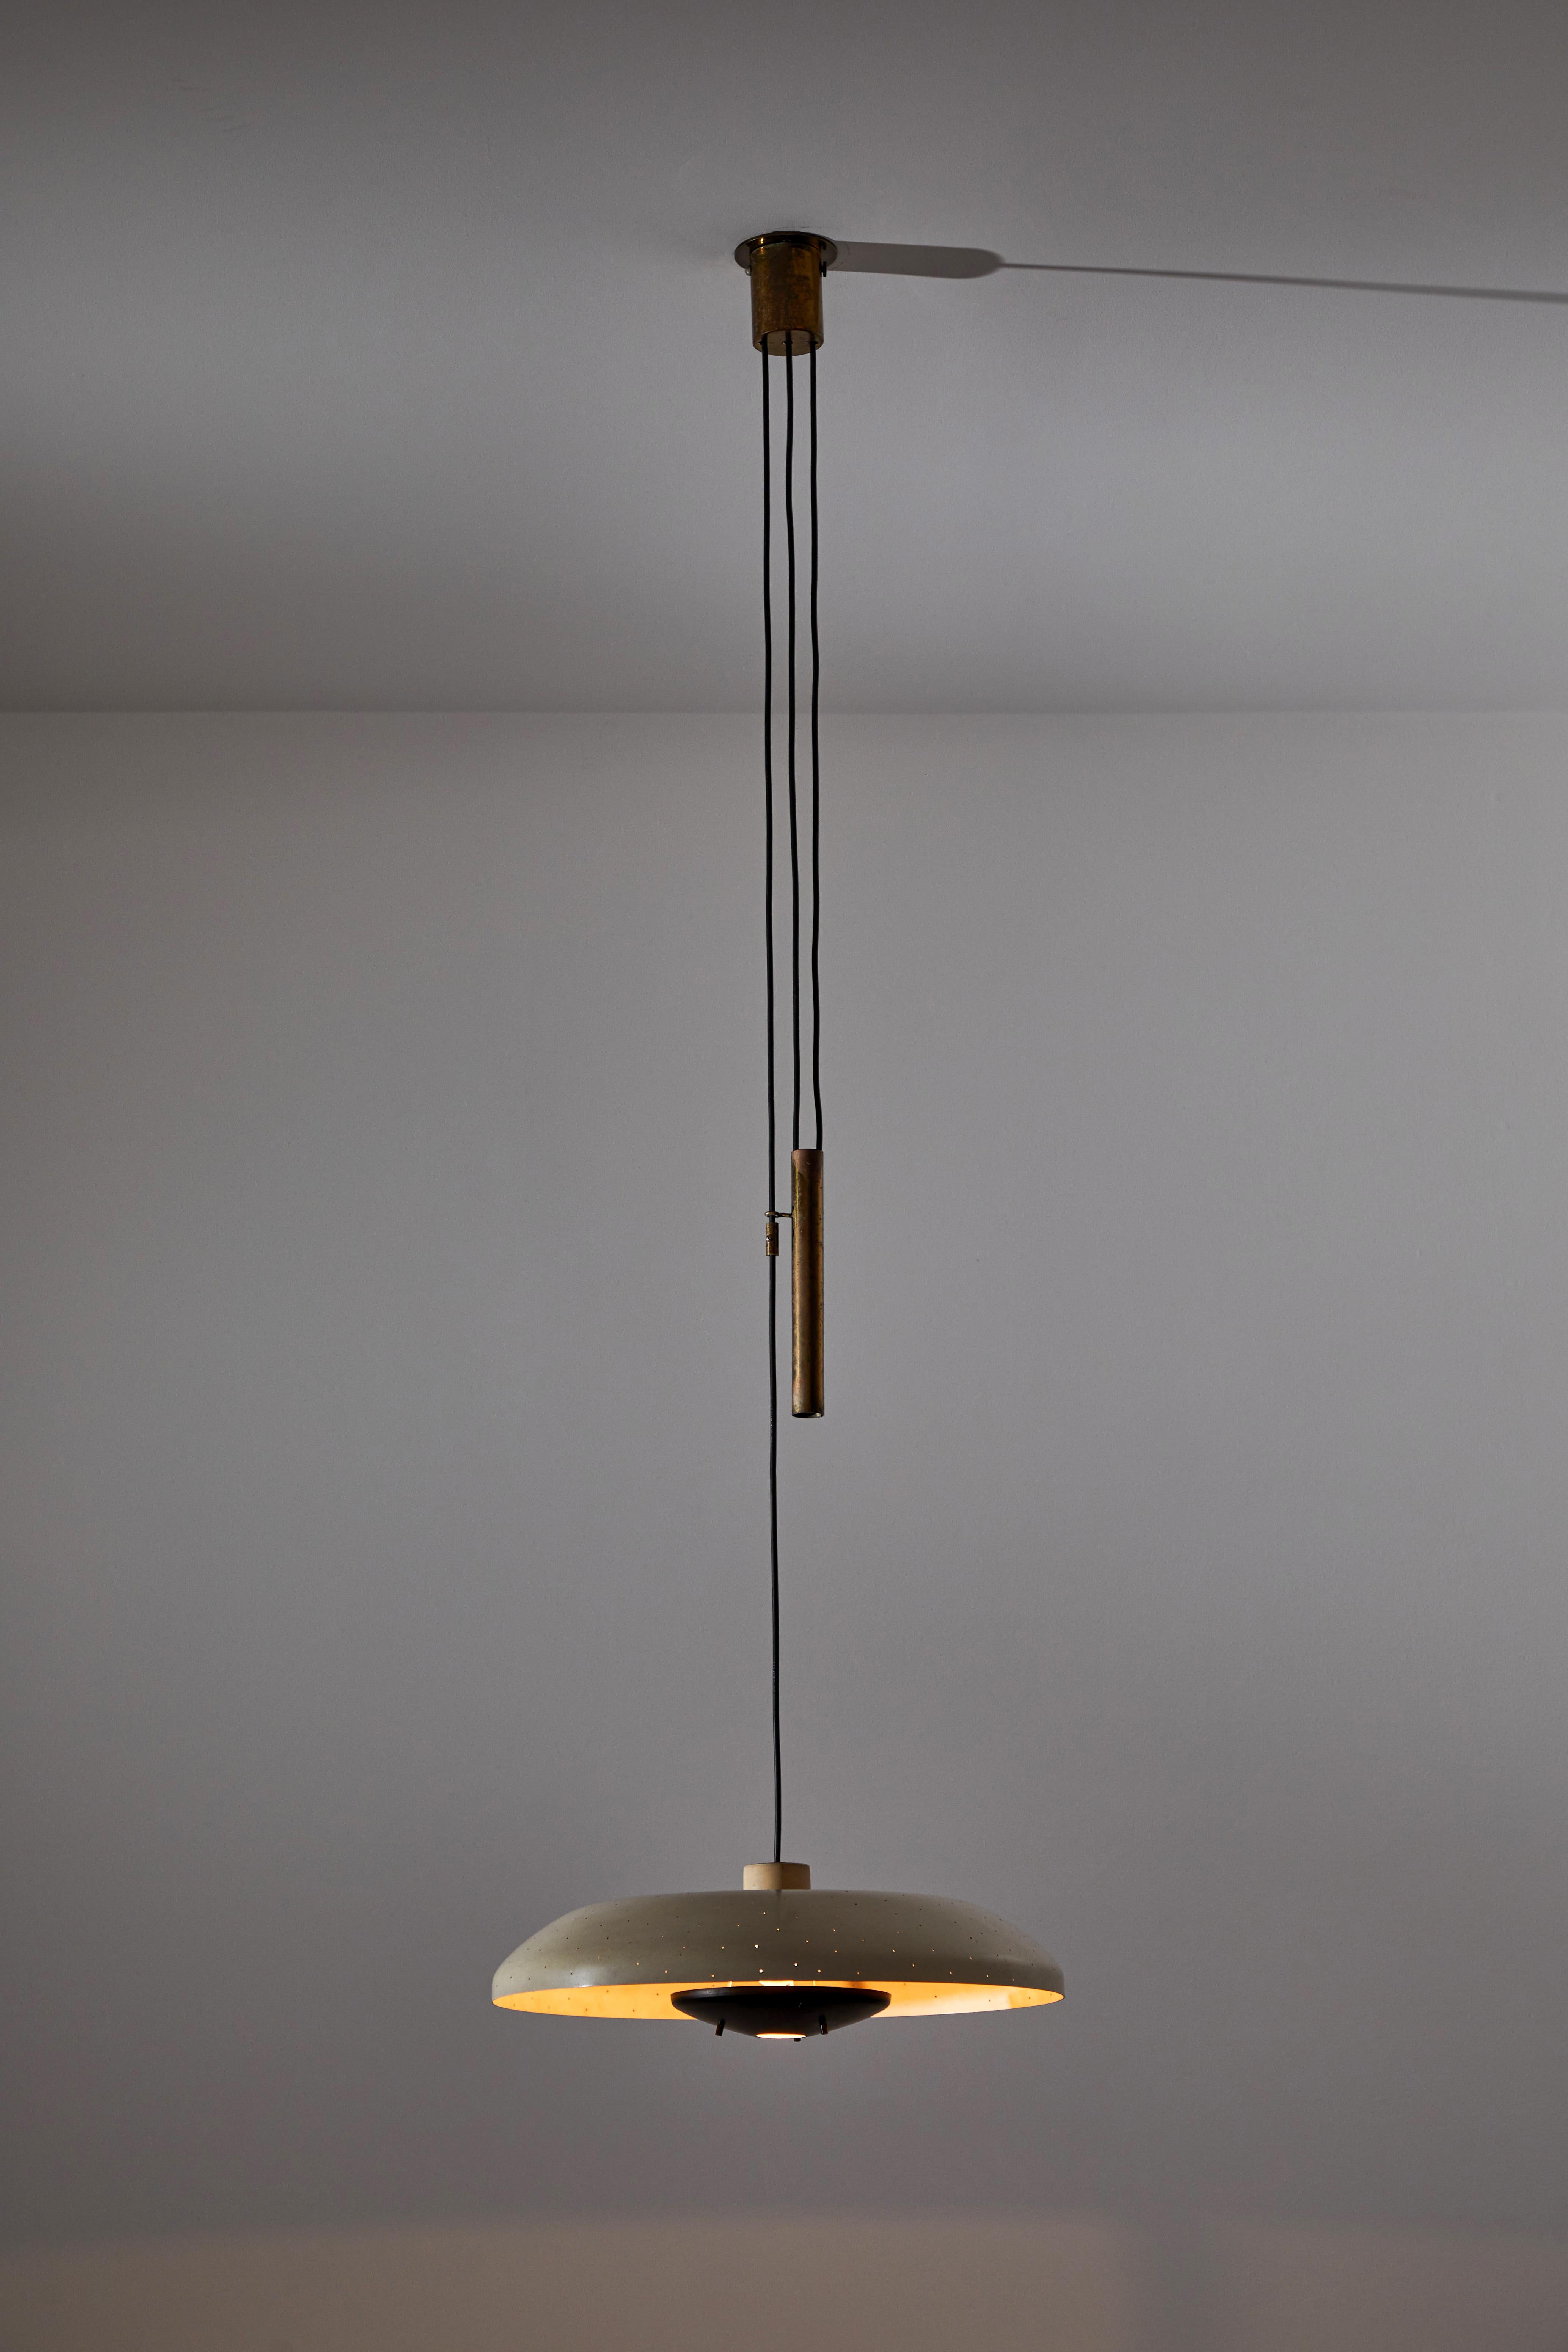 Rare model 2069 counterweight suspension light by Gino Sarfatti for Arteluce. Designed and manufactured in Italy, 1952. Painted aluminum, solid brass counterweight, original canopy, custom brass ceiling plate. Rewired for U.S. standards. We